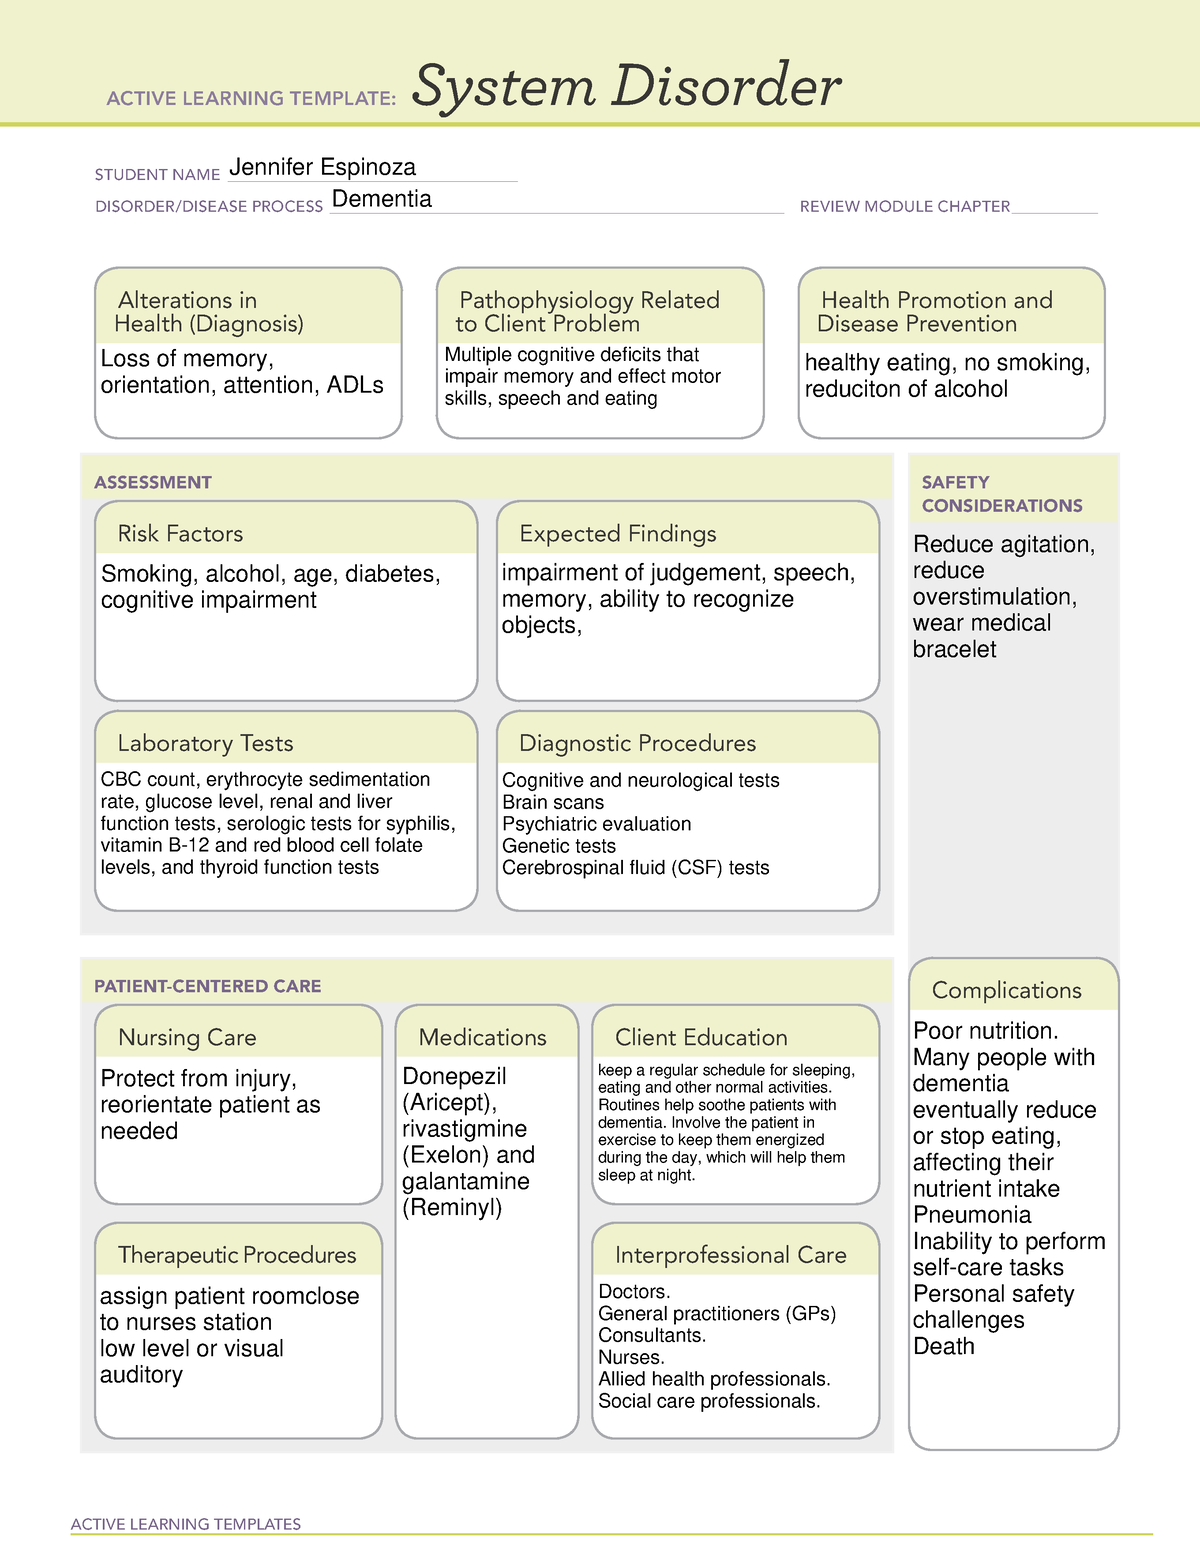 CM Dementia - concept map - ACTIVE LEARNING TEMPLATES System Disorder ...